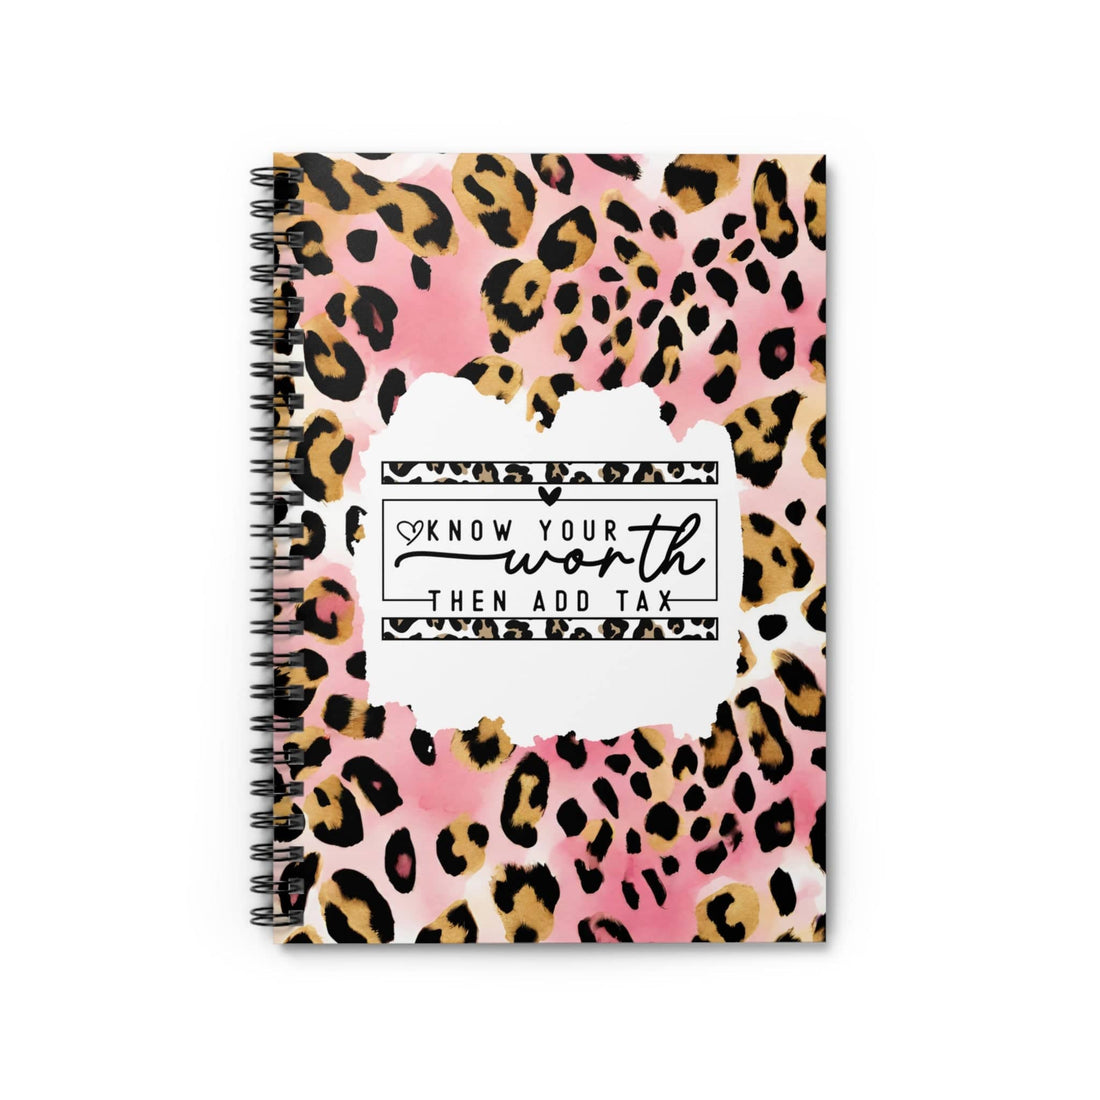 Pink Leopard Print Therapy Journal Spiral Notebook with Motivational Quote